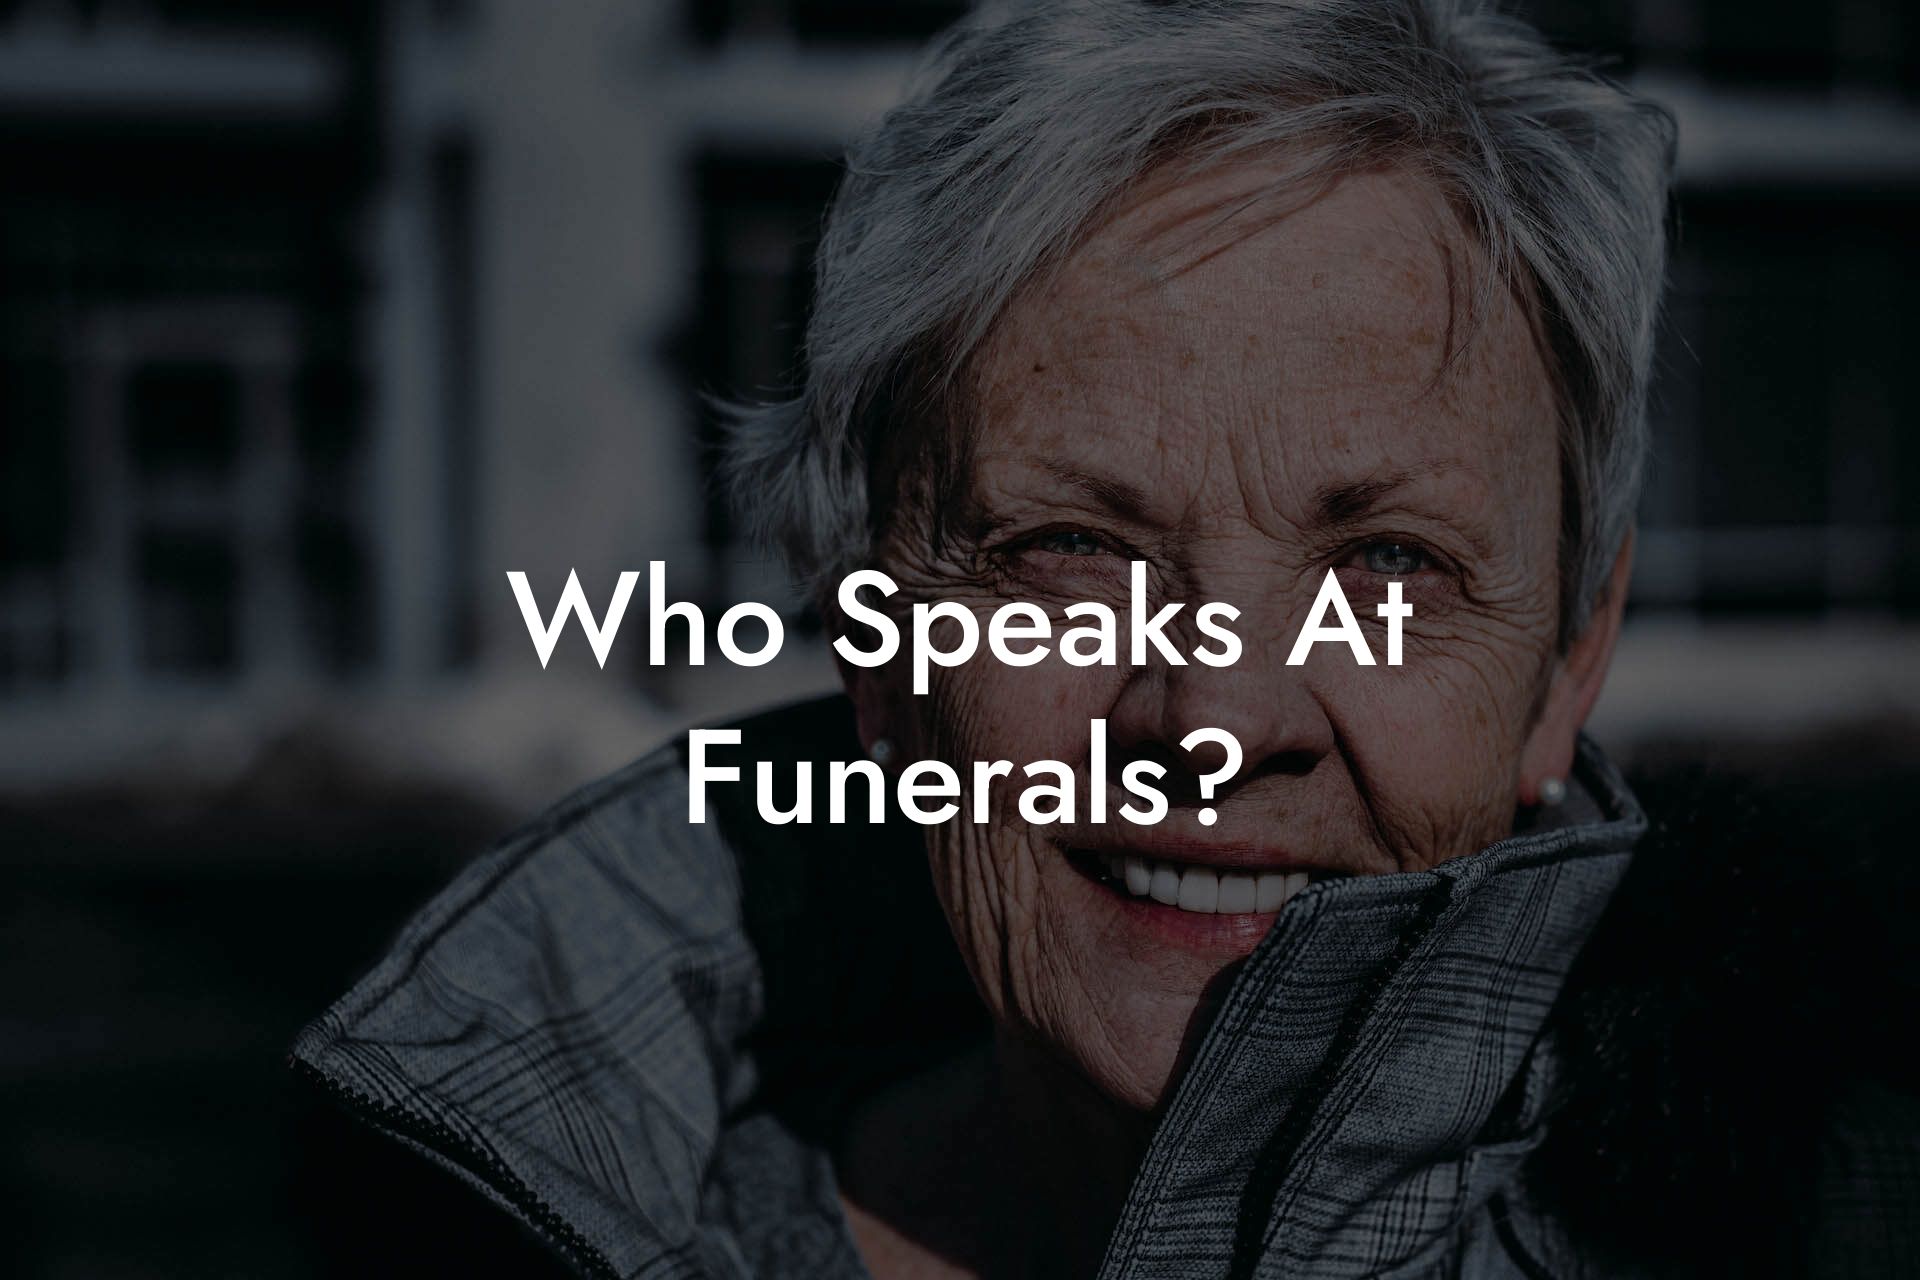 Who Speaks At Funerals?